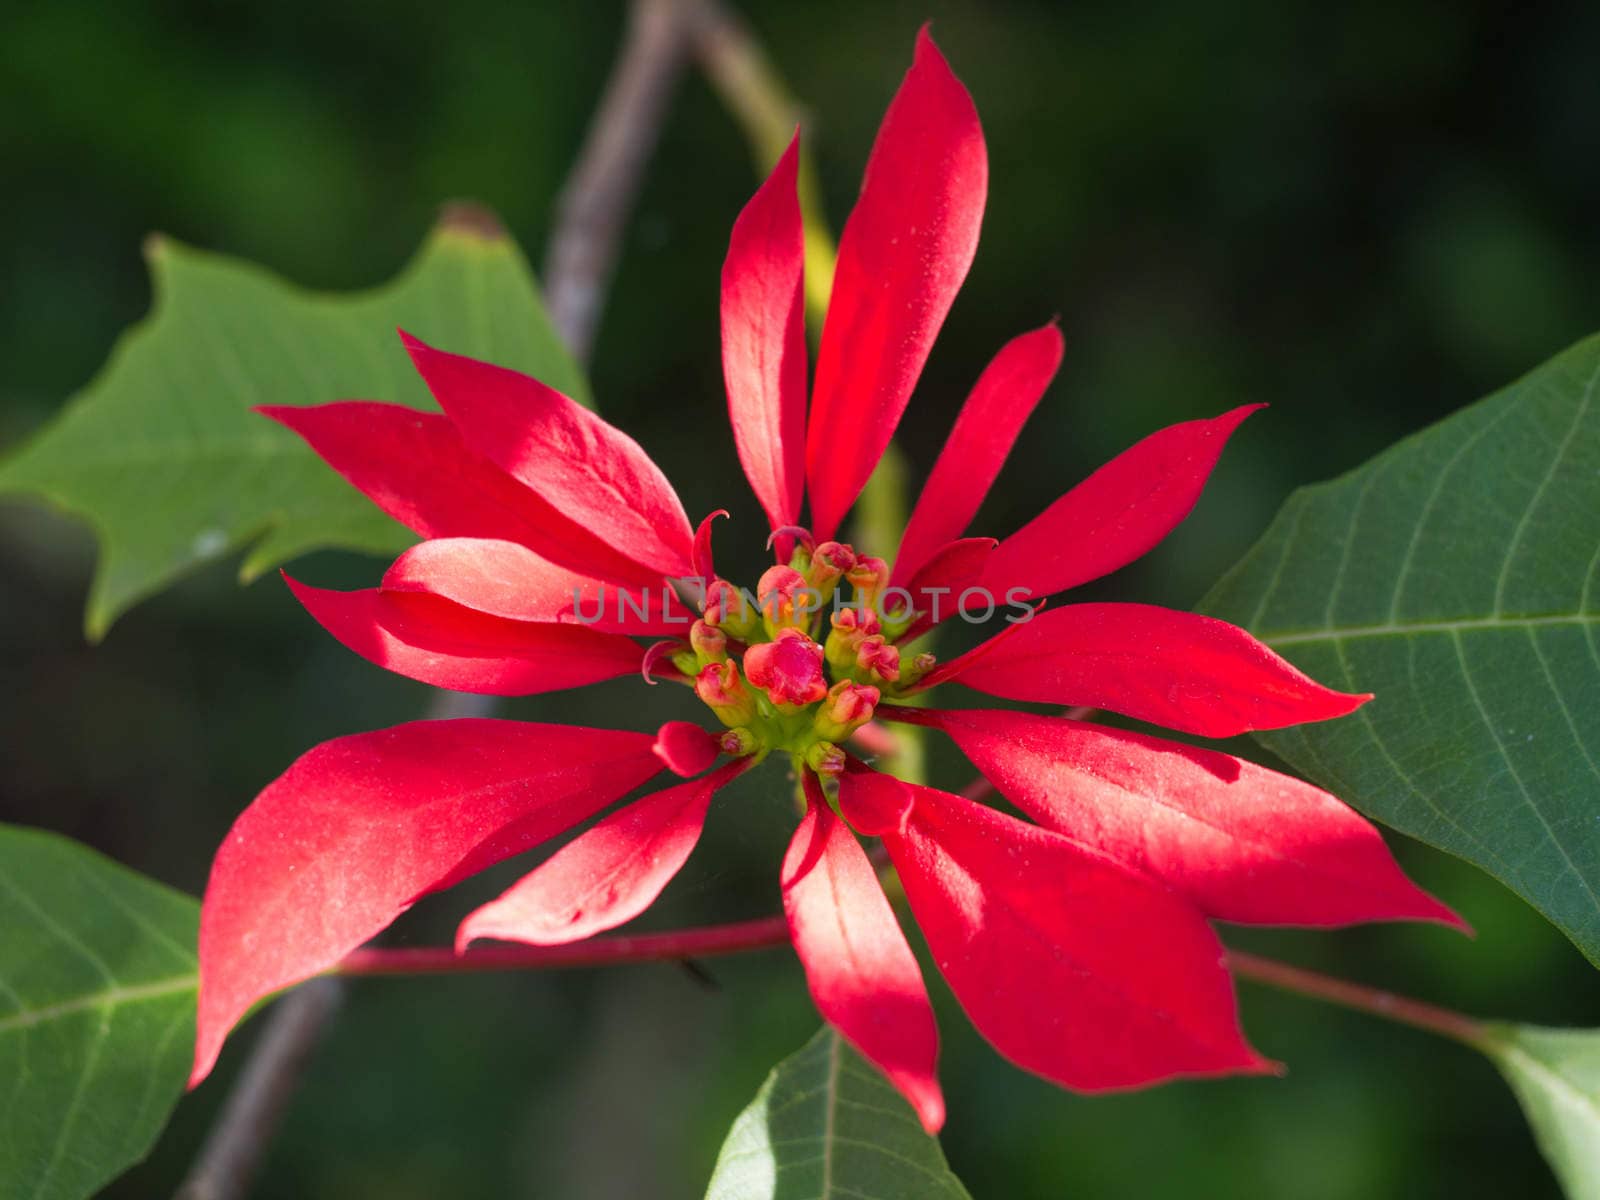 Red Poinsettia Close-up by mroz